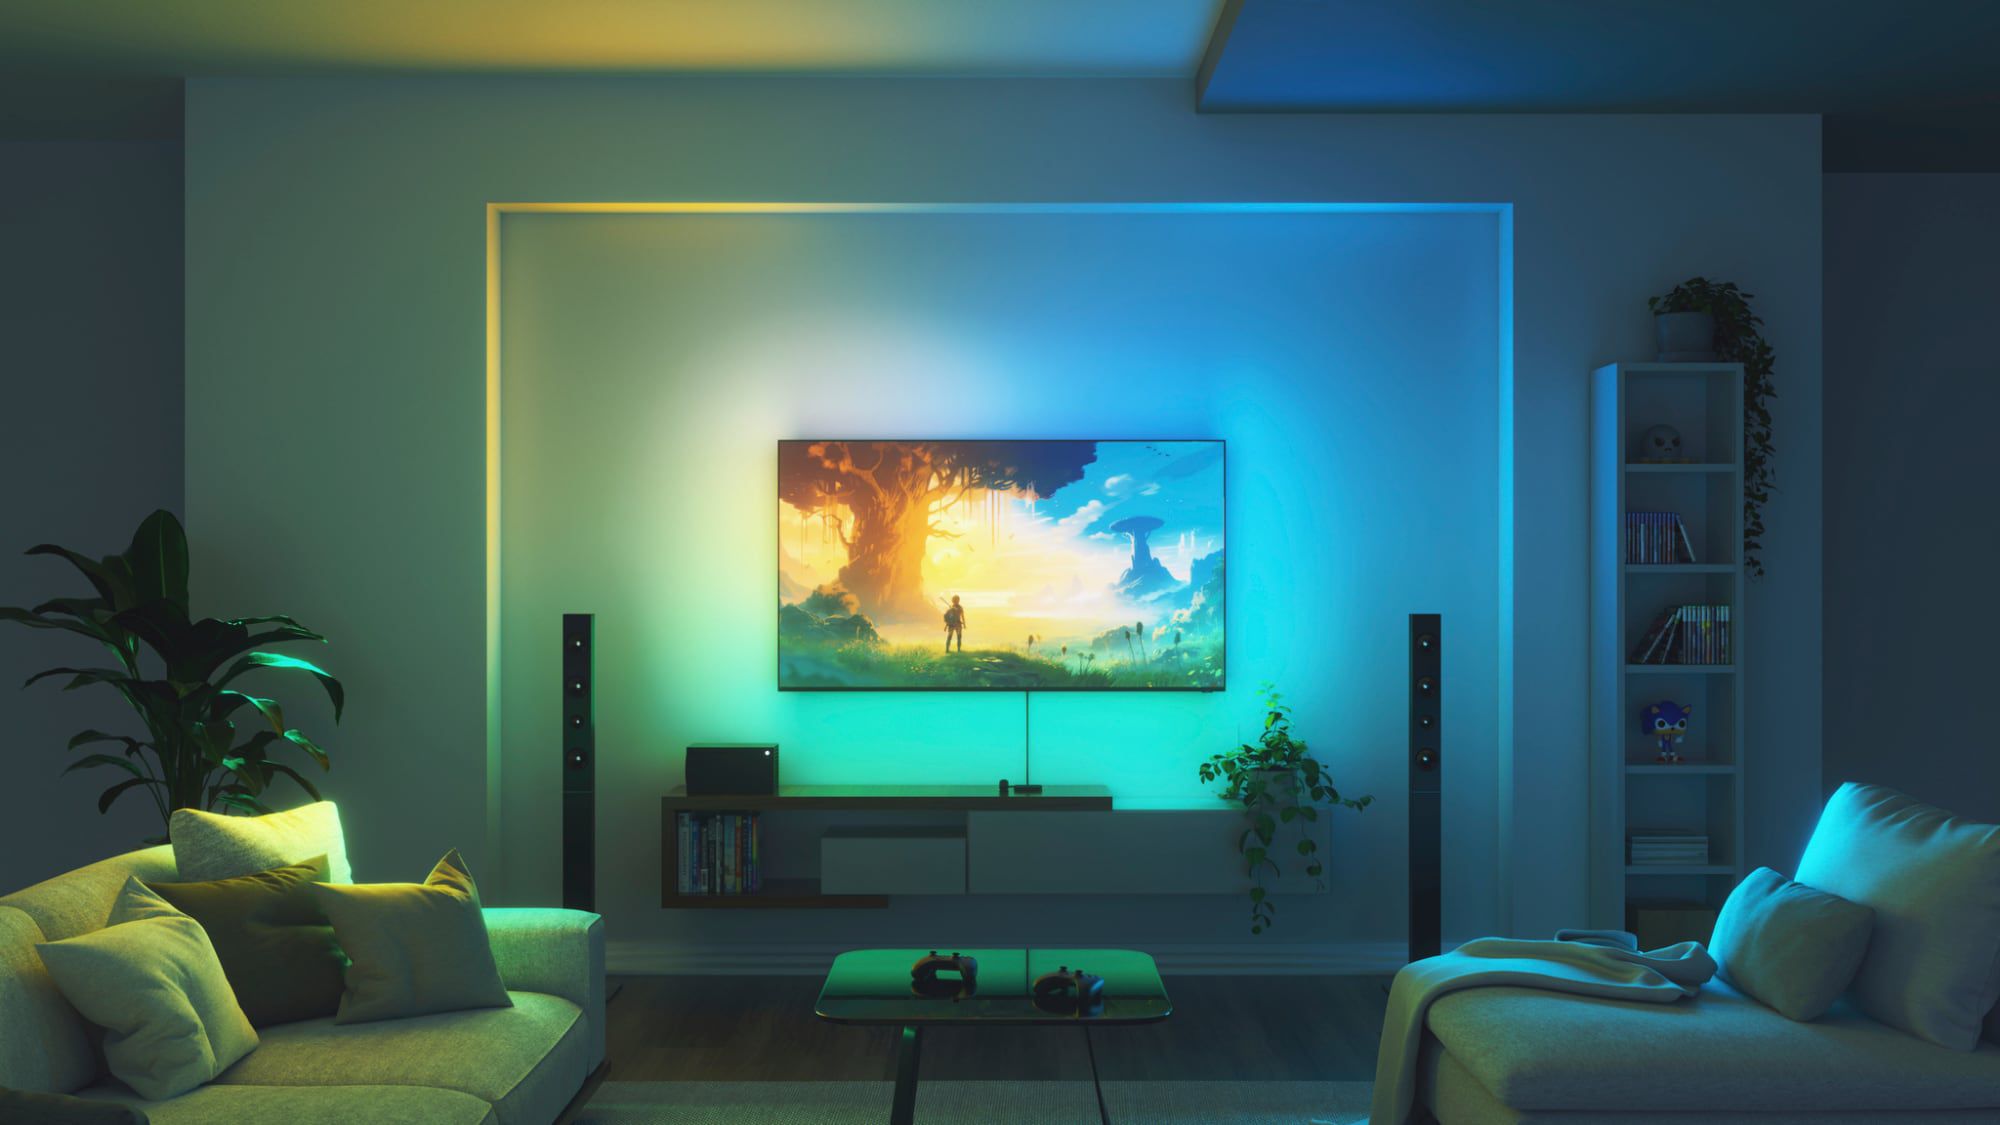 Govee TV lights are the Ambilight alternative I've been looking for